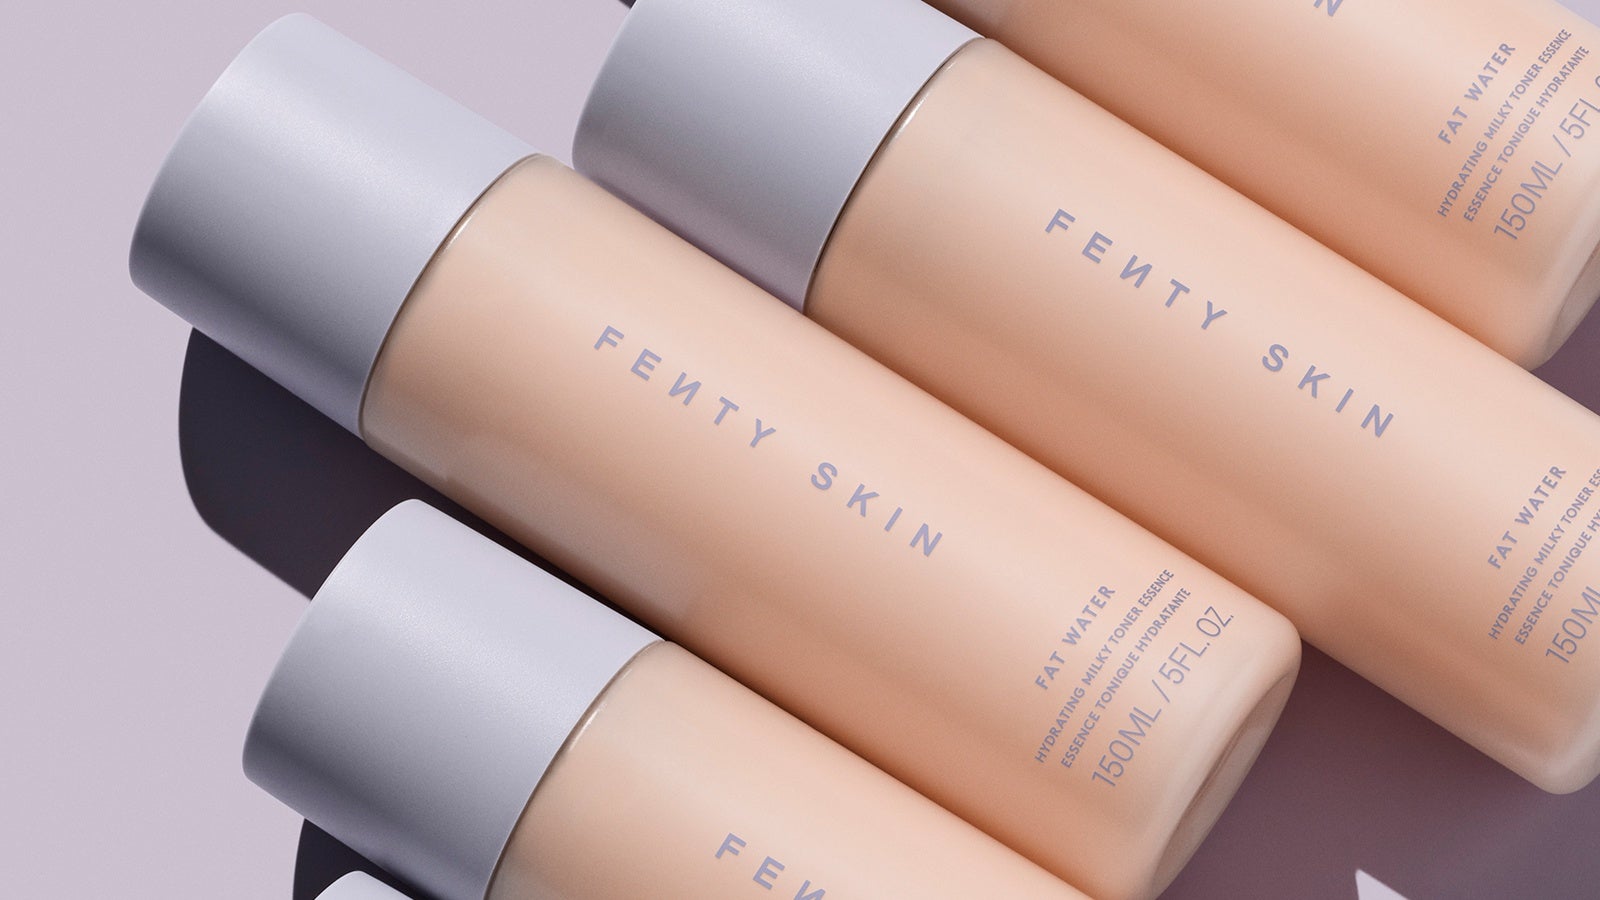 The Latest Launches From Fenty Beauty & Fenty Skin